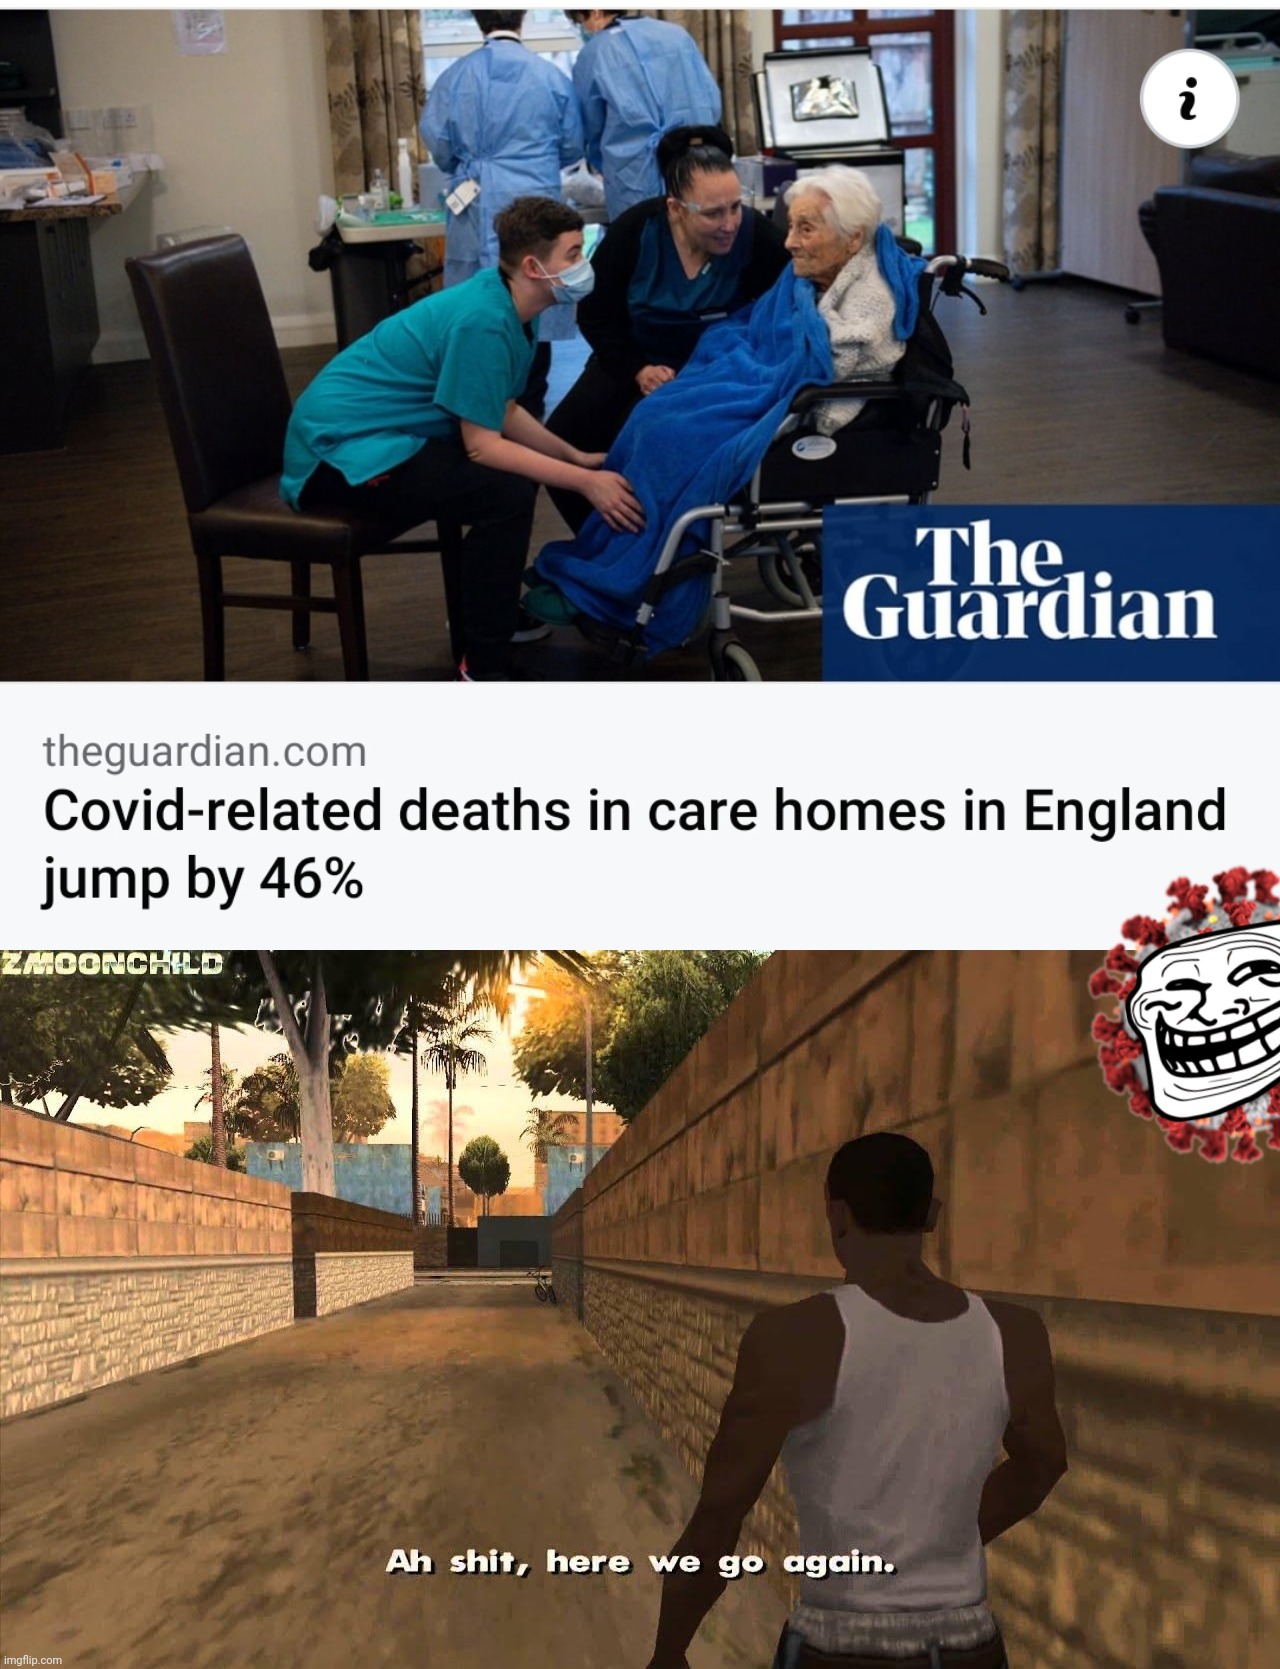 oof | image tagged in here we go again,covid,thieves,ridiculous,ded,noooooooooooooooooooooooo | made w/ Imgflip meme maker